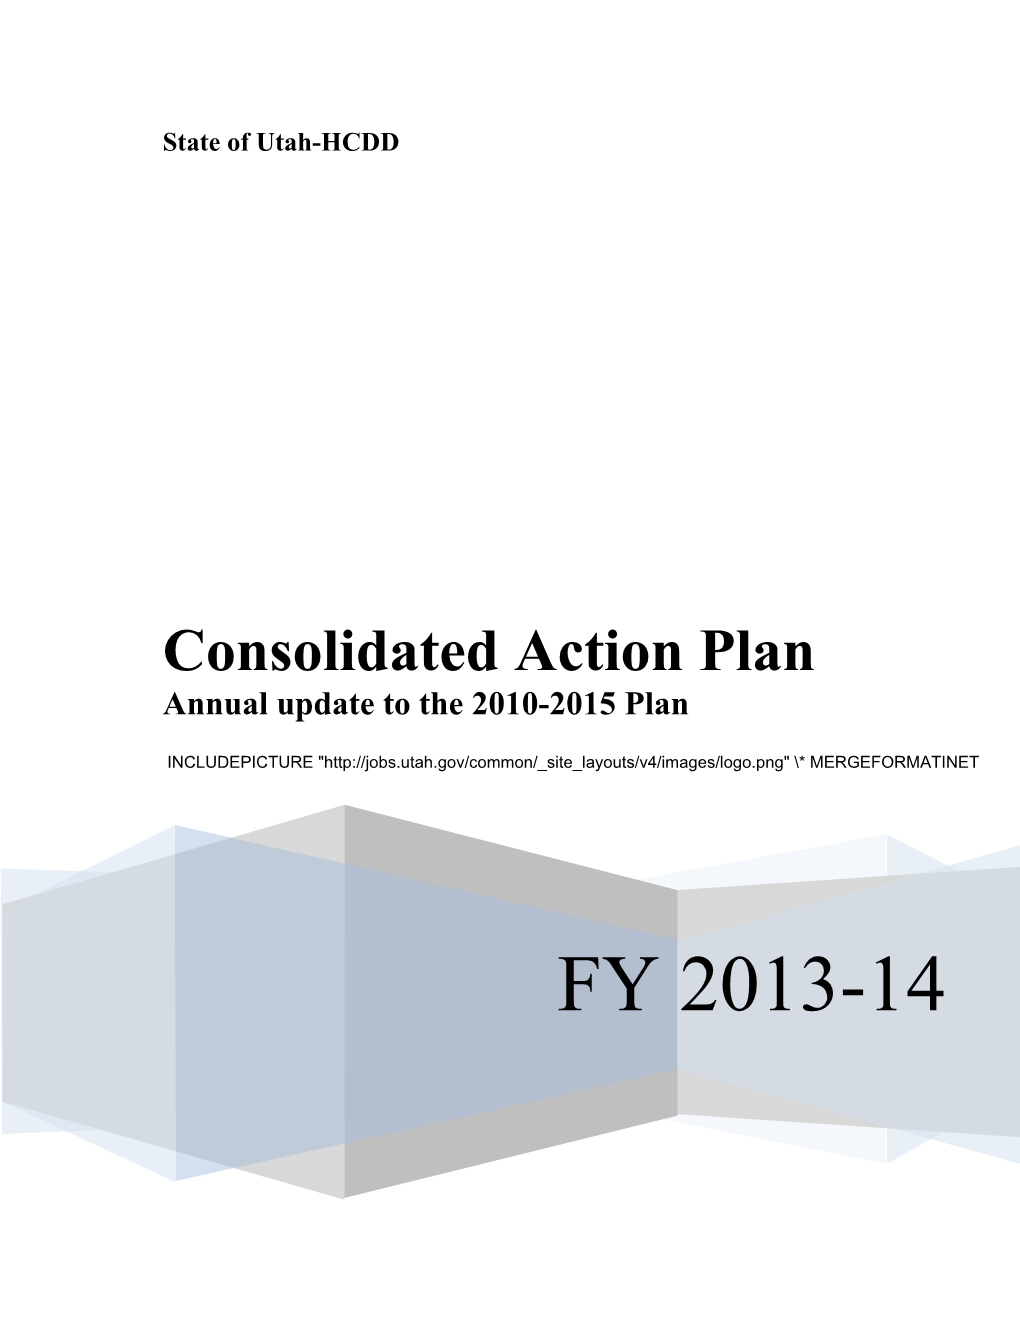 Consolidated Action Plan